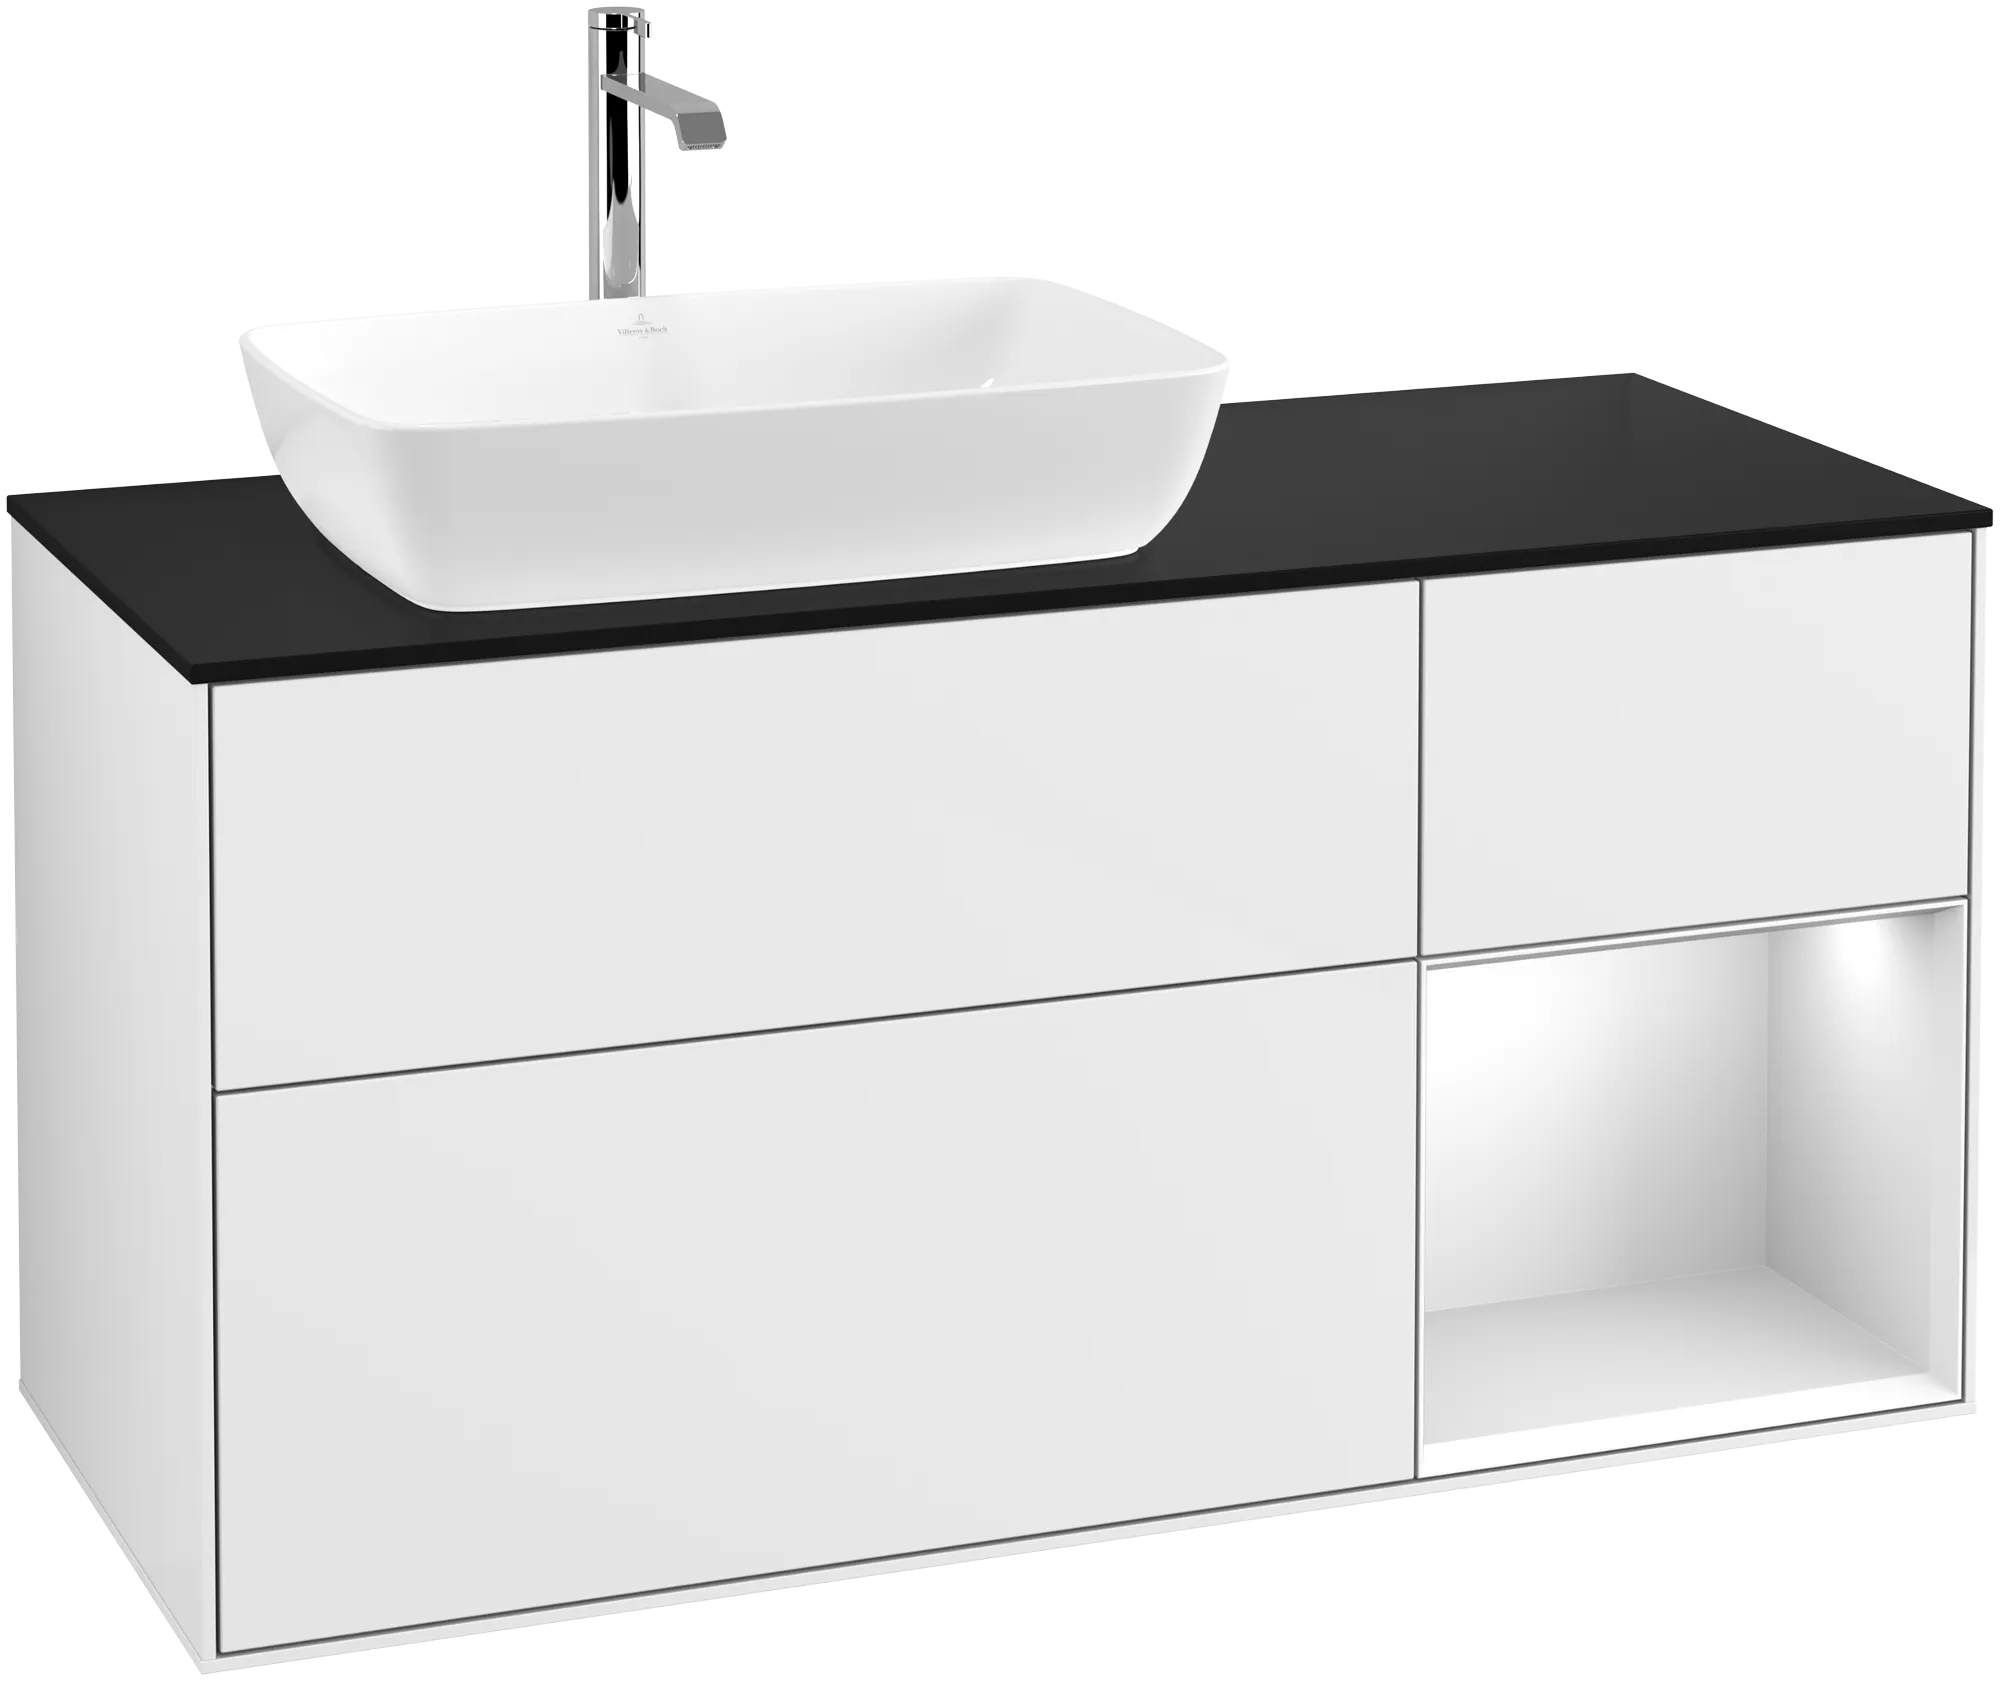 Picture of VILLEROY BOCH Finion Vanity unit, with lighting, 3 pull-out compartments, 1200 x 603 x 501 mm, Glossy White Lacquer / White Matt Lacquer / Glass Black Matt #G812MTGF